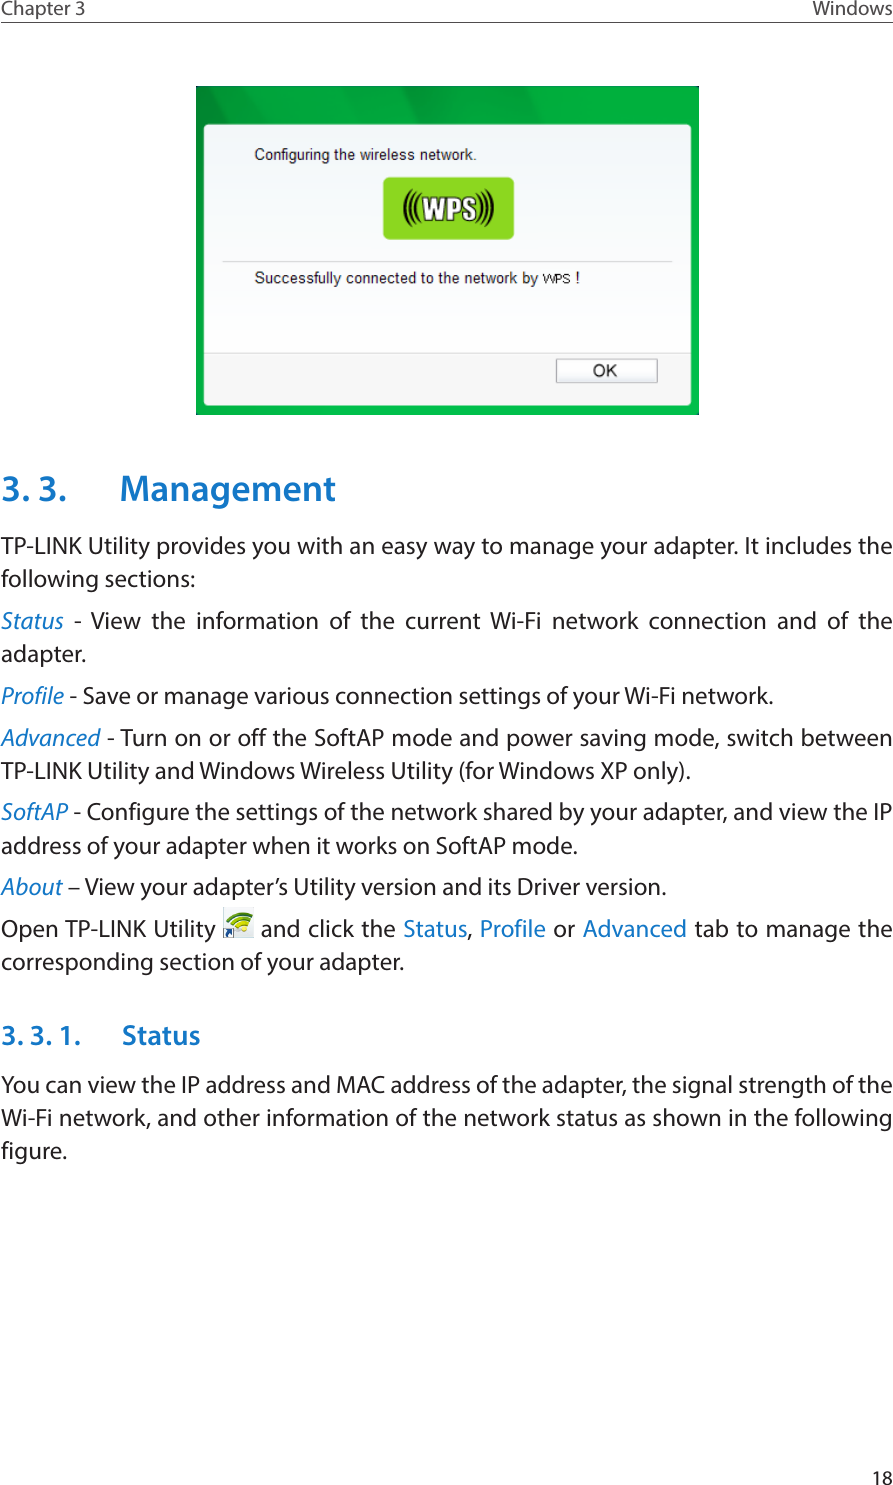 18Chapter 3 Windows3. 3.  ManagementTP-LINK Utility provides you with an easy way to manage your adapter. It includes the following sections:Status - View the information of the current Wi-Fi network connection and of the adapter.Profile - Save or manage various connection settings of your Wi-Fi network.Advanced - Turn on or off the SoftAP mode and power saving mode, switch between TP-LINK Utility and Windows Wireless Utility (for Windows XP only).SoftAP - Configure the settings of the network shared by your adapter, and view the IP address of your adapter when it works on SoftAP mode.About – View your adapter’s Utility version and its Driver version.Open TP-LINK Utility   and click the Status, Profile or Advanced tab to manage the corresponding section of your adapter.3. 3. 1.  StatusYou can view the IP address and MAC address of the adapter, the signal strength of the Wi-Fi network, and other information of the network status as shown in the following figure.